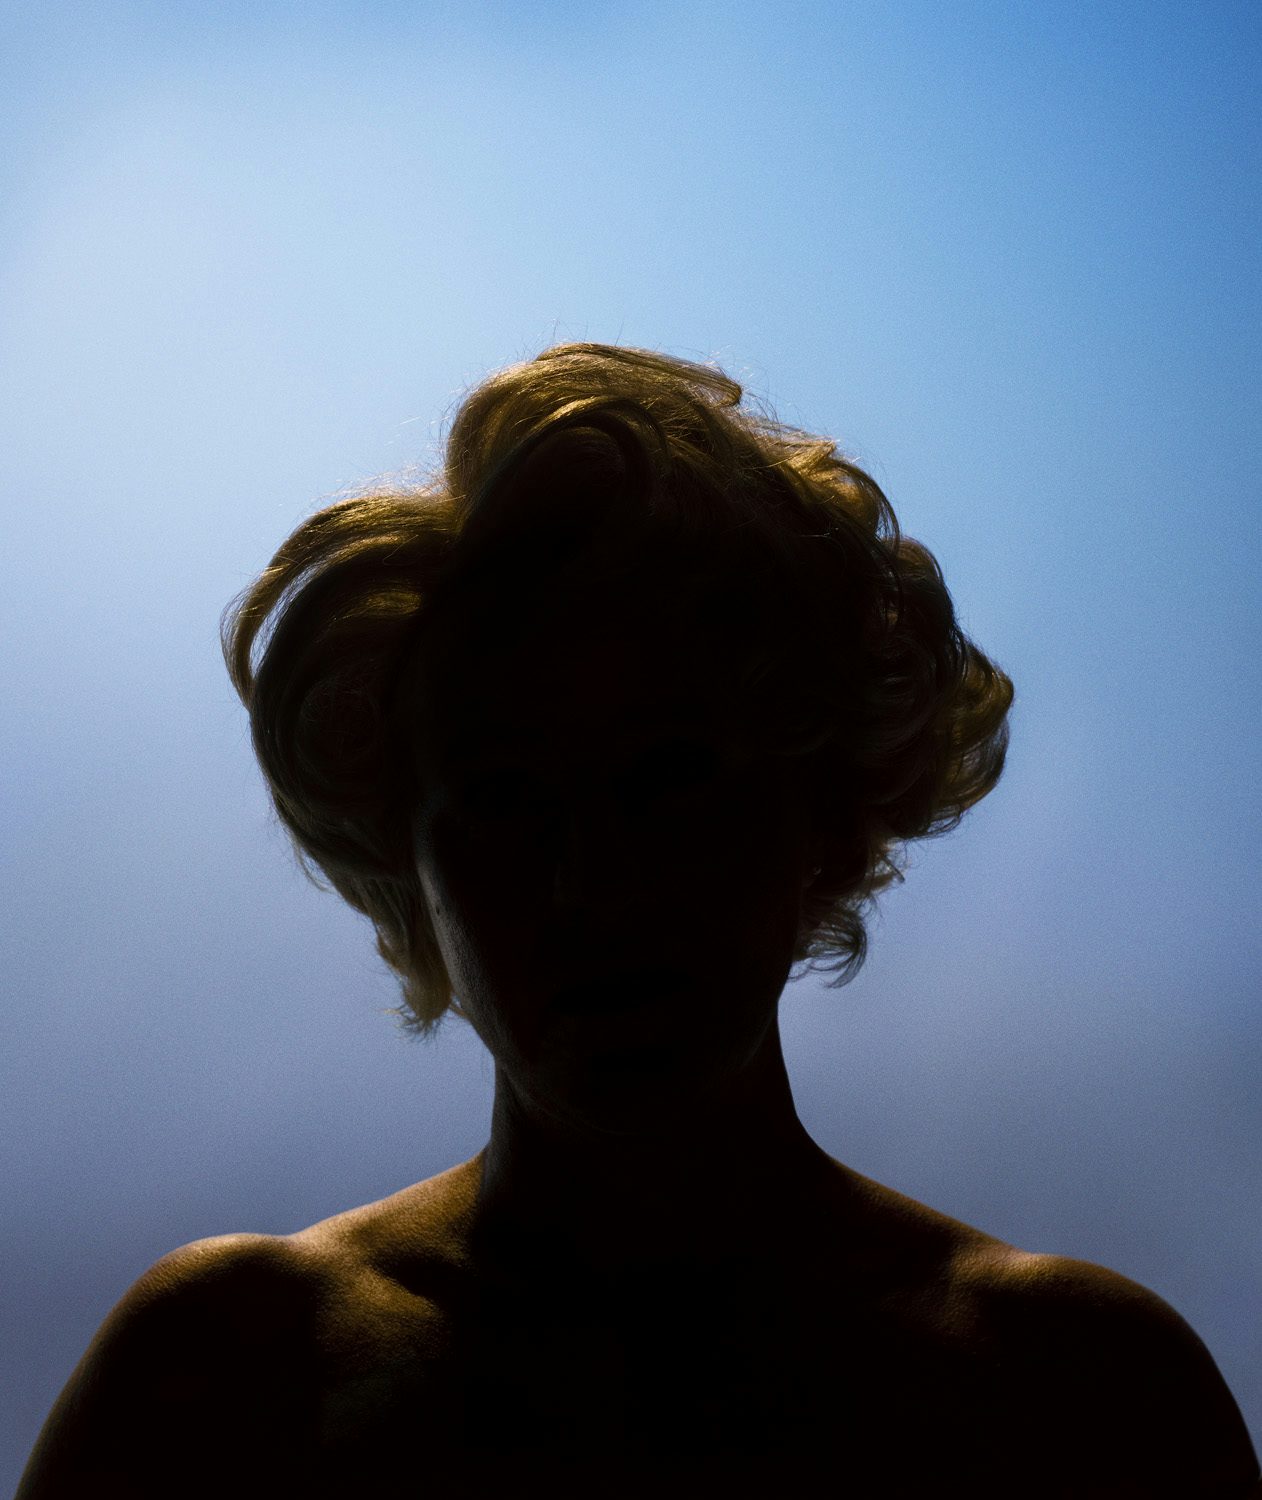 The image by Alex Prager shows the silhouette of a person's head with short hair and bare shoulders against a dark blue background